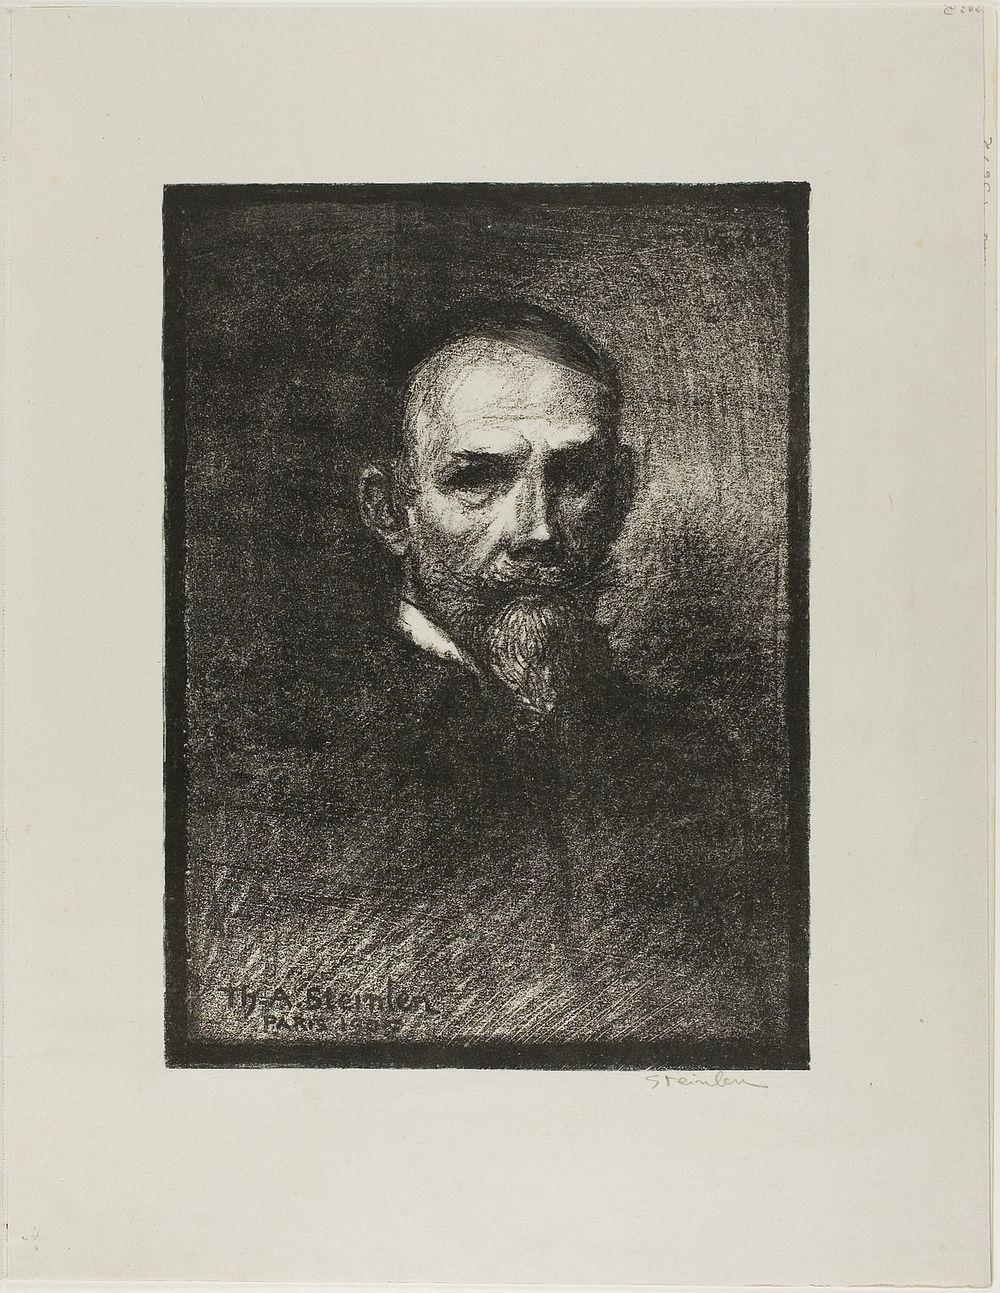 Steinlen, Frontal View, Head to the Right by Théophile-Alexandre Pierre Steinlen